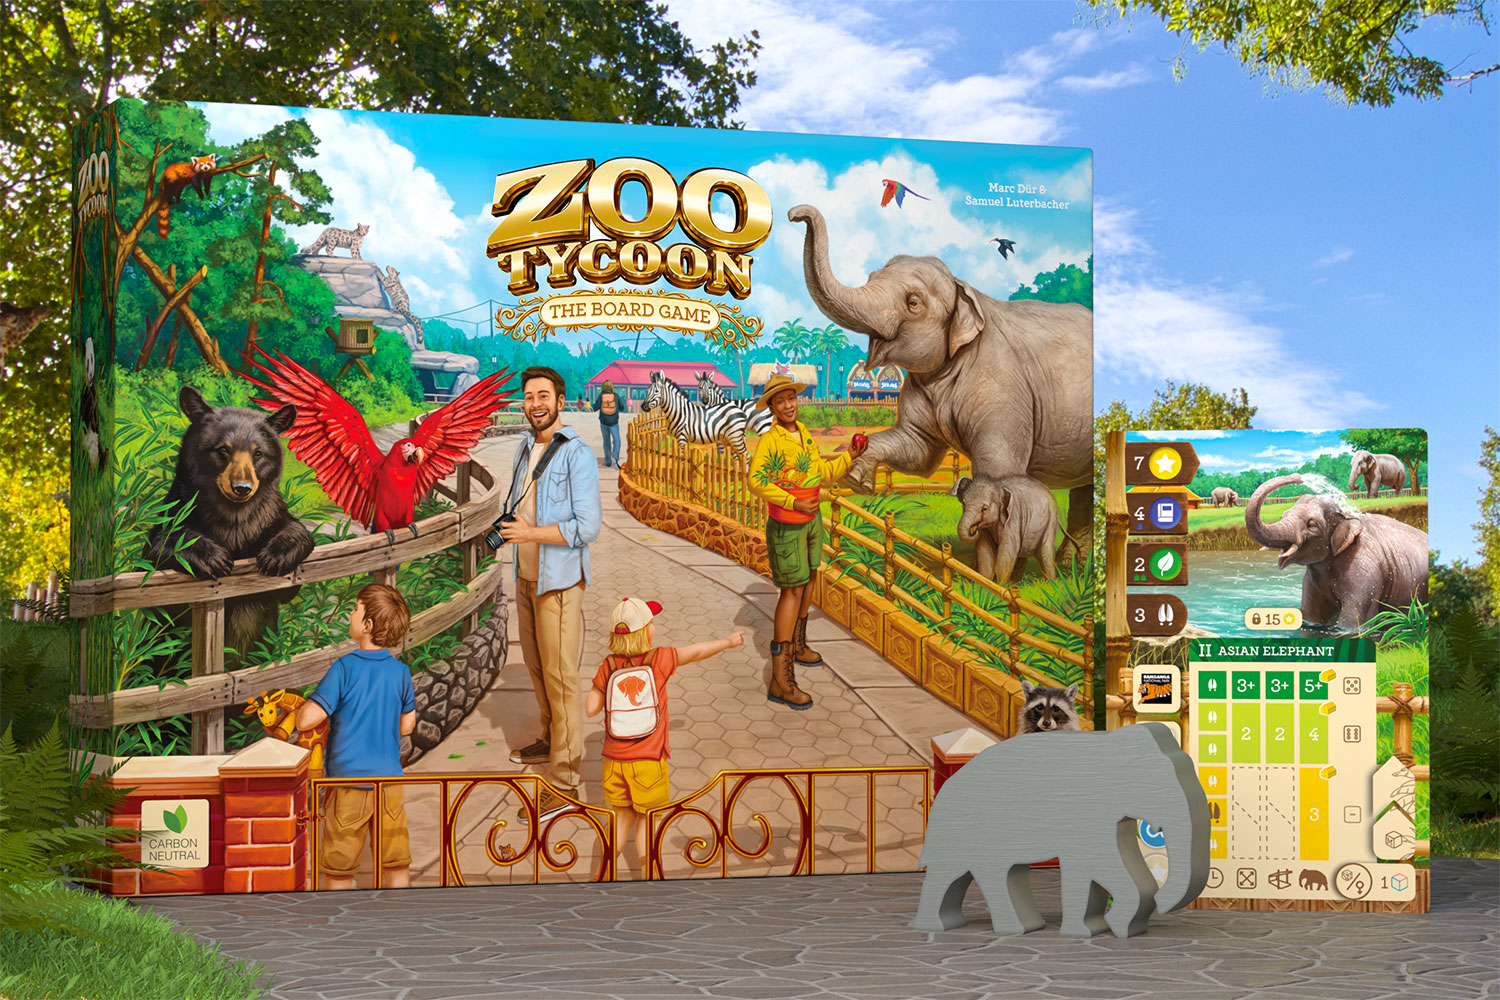 The Adorable, Against-All-Odds Charm of 'Zoo Tycoon